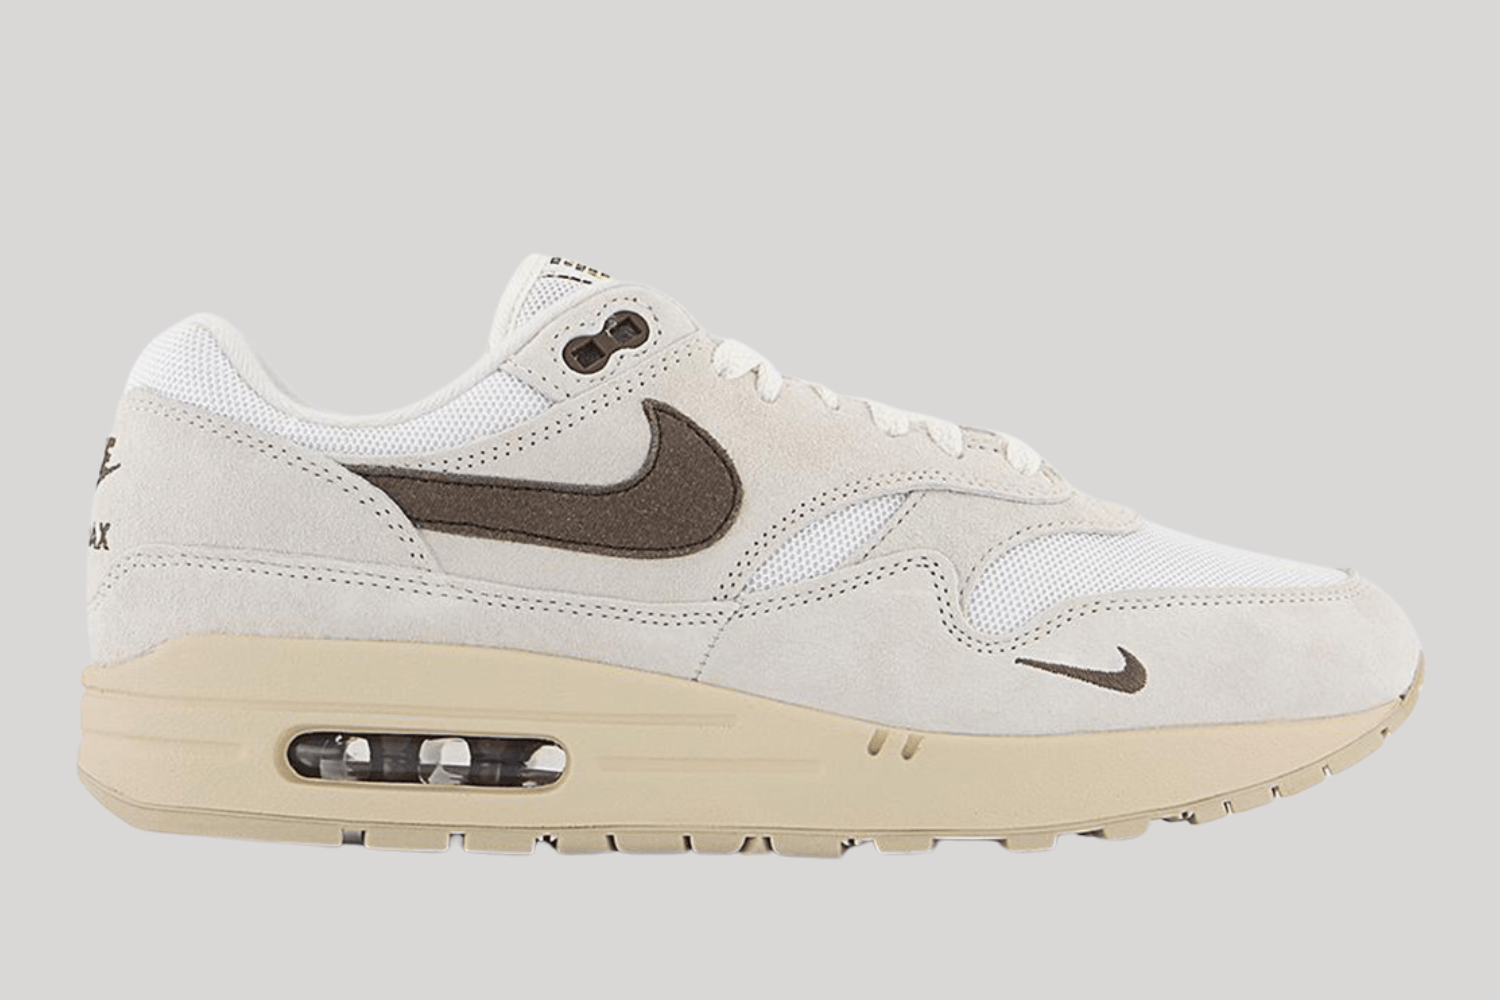 First images of the Nike Air Max 1 'Ironstone